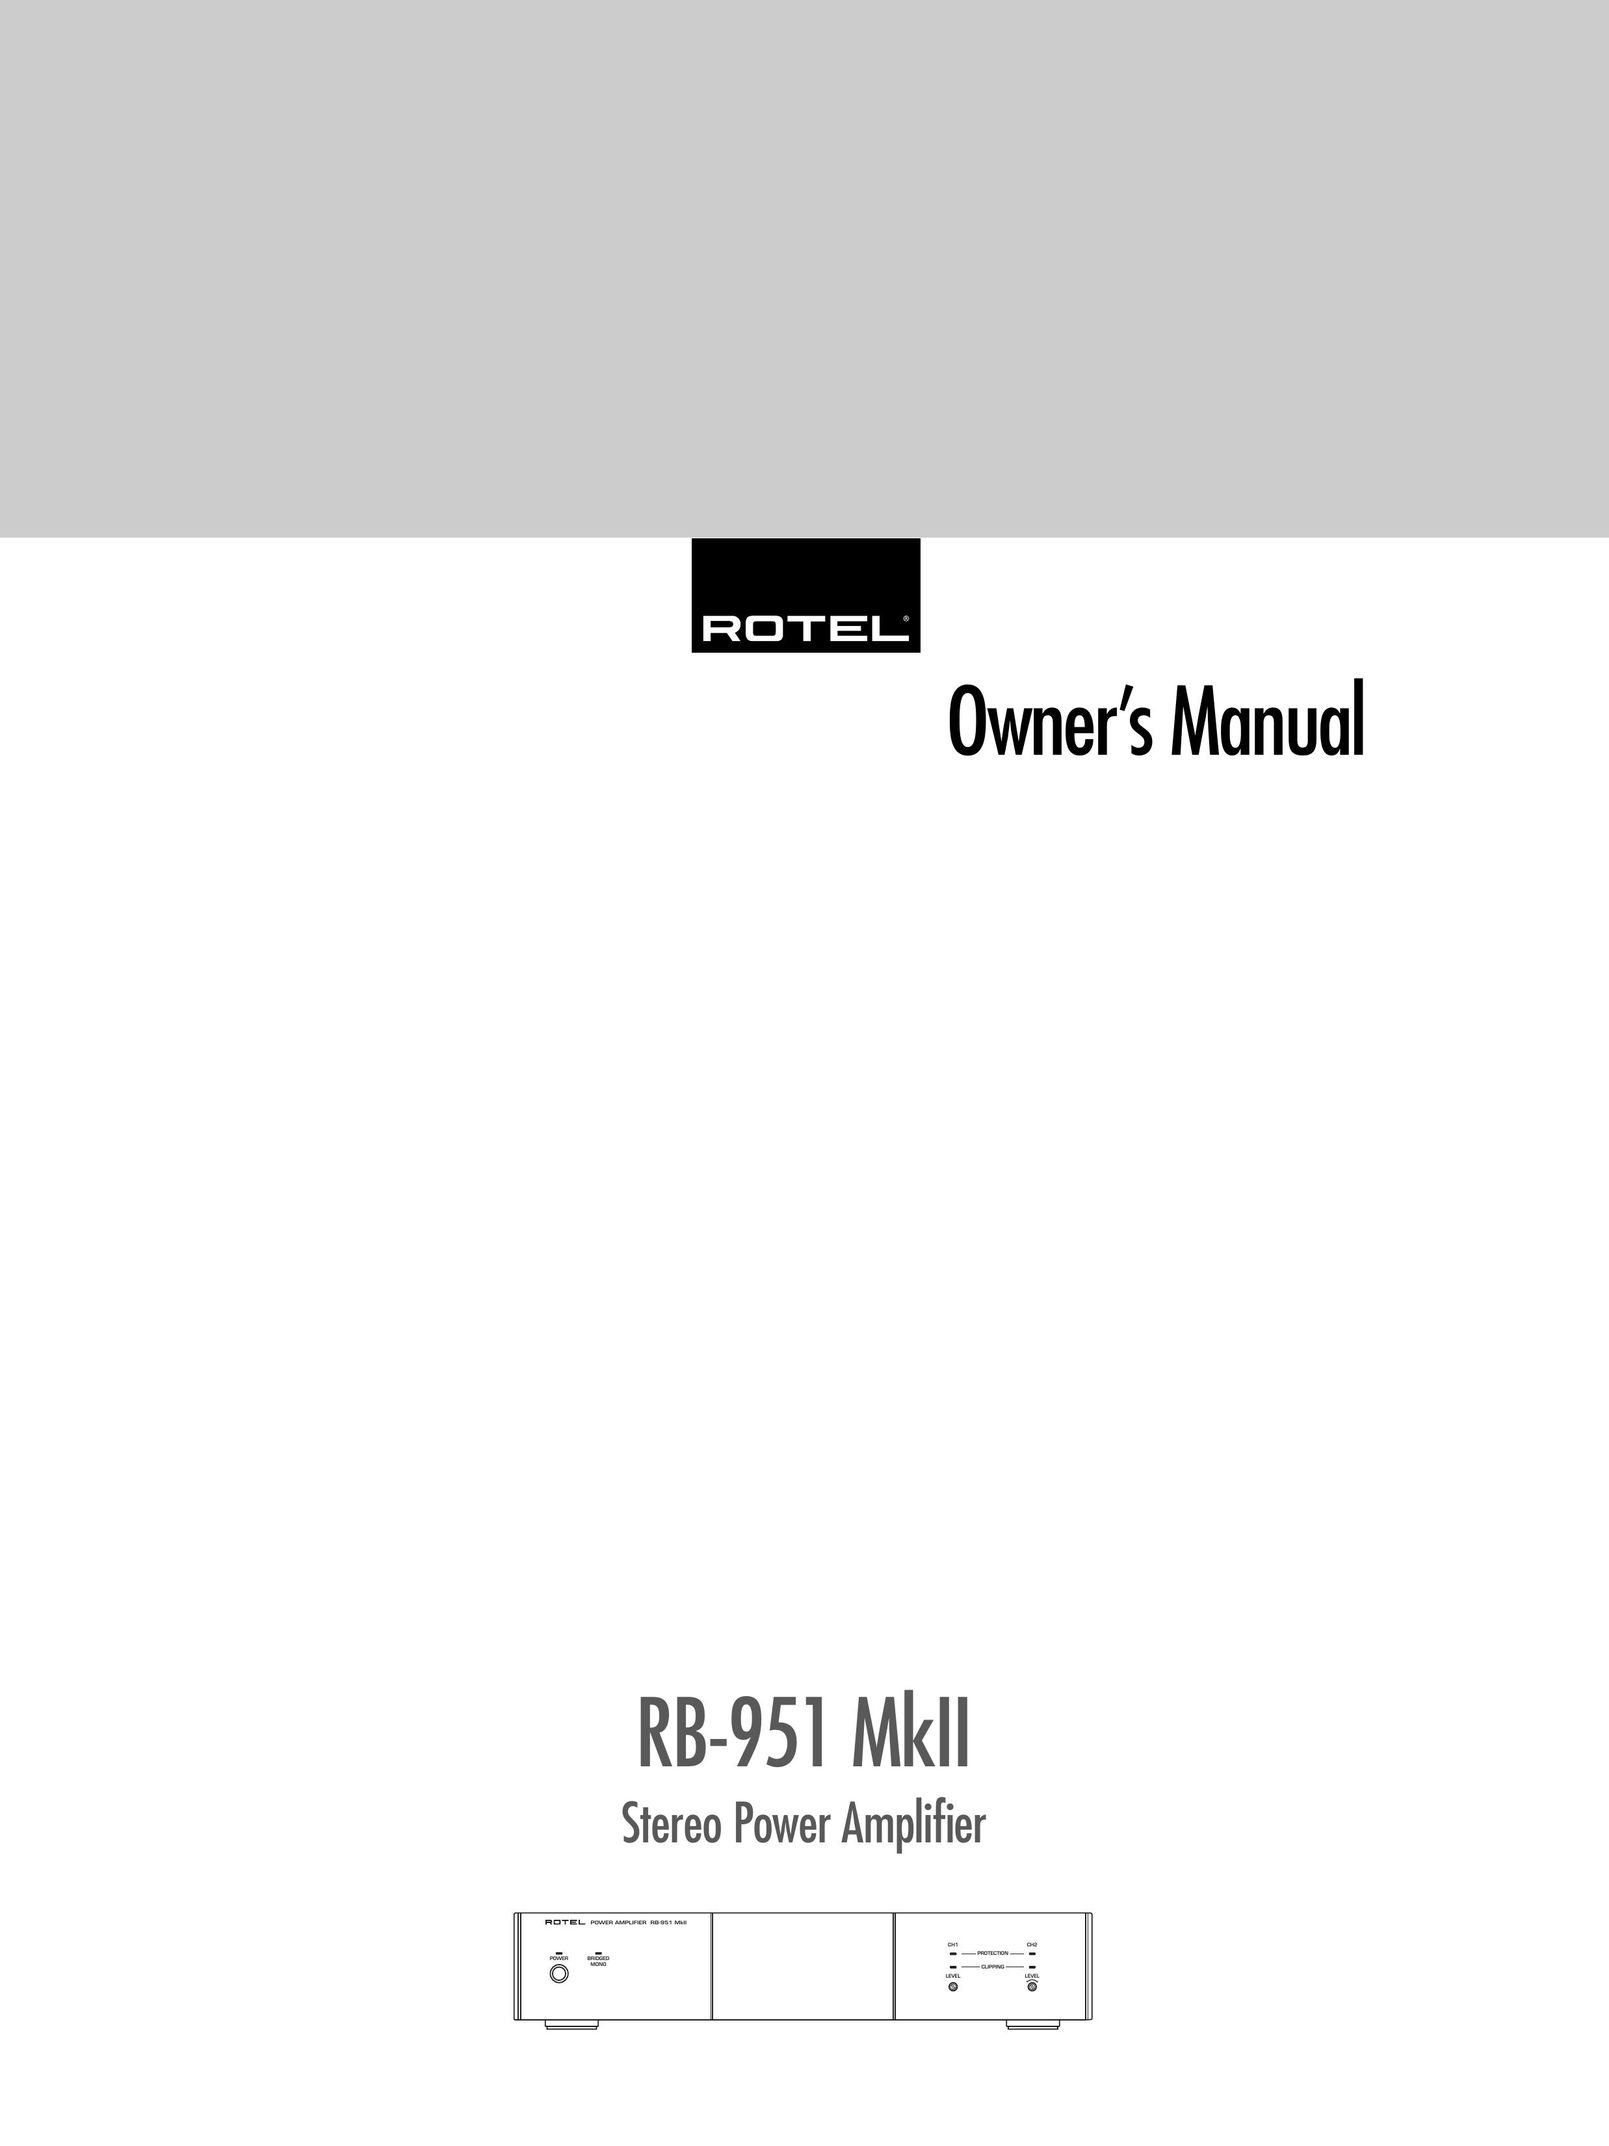 Rotel RB-951 MkII Power Supply User Manual